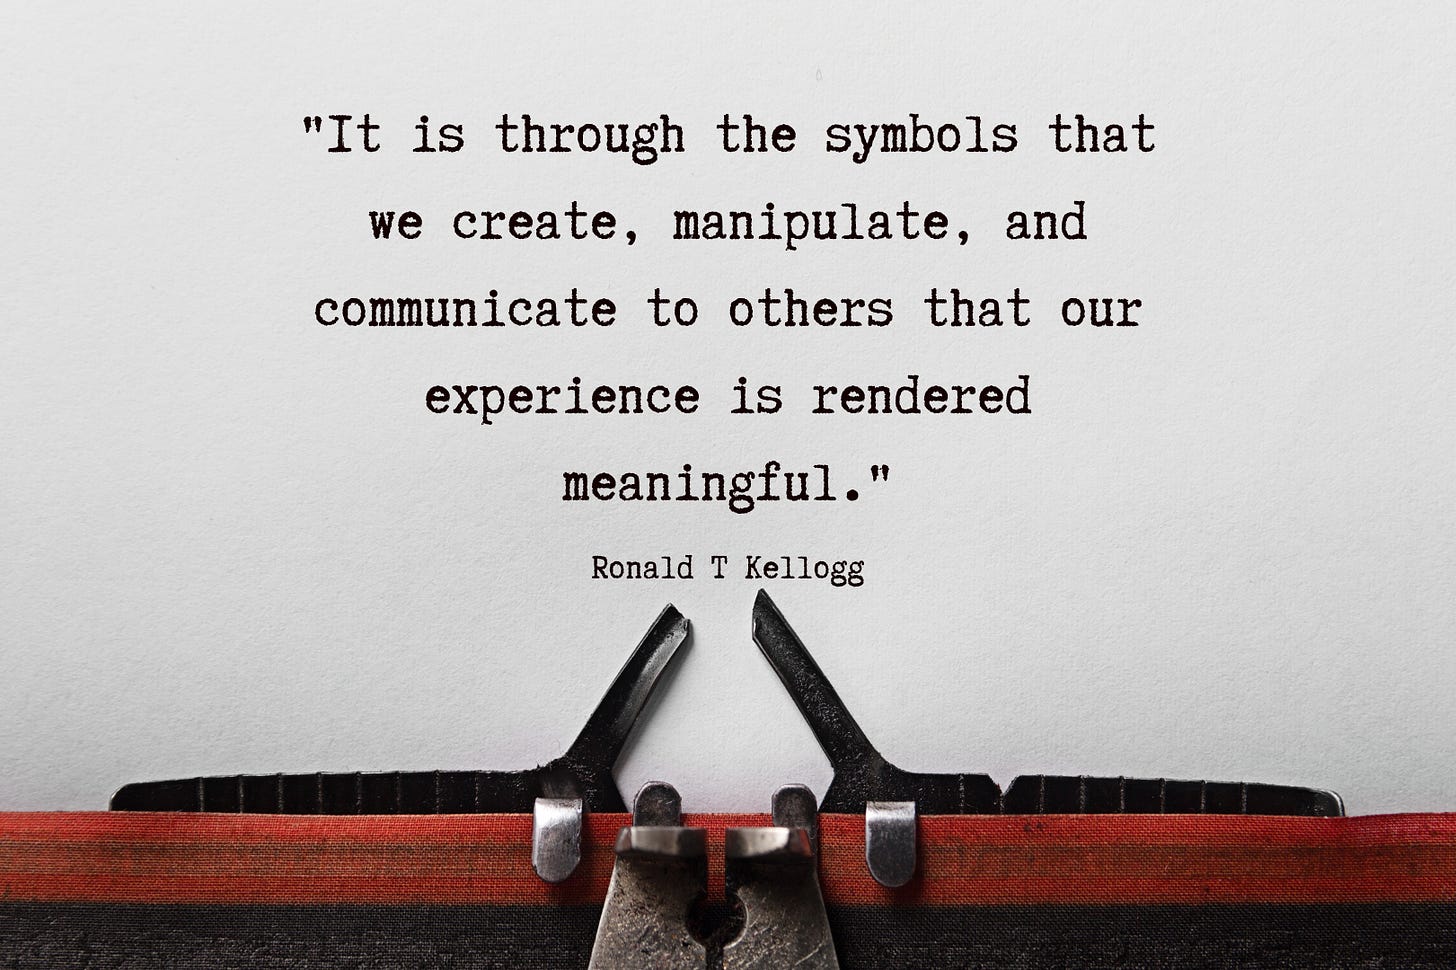 A quote by Ronald T Kellogg: It is through the symbols that we create, manipulate, and communicate to others that our experience is rendered meaningful.